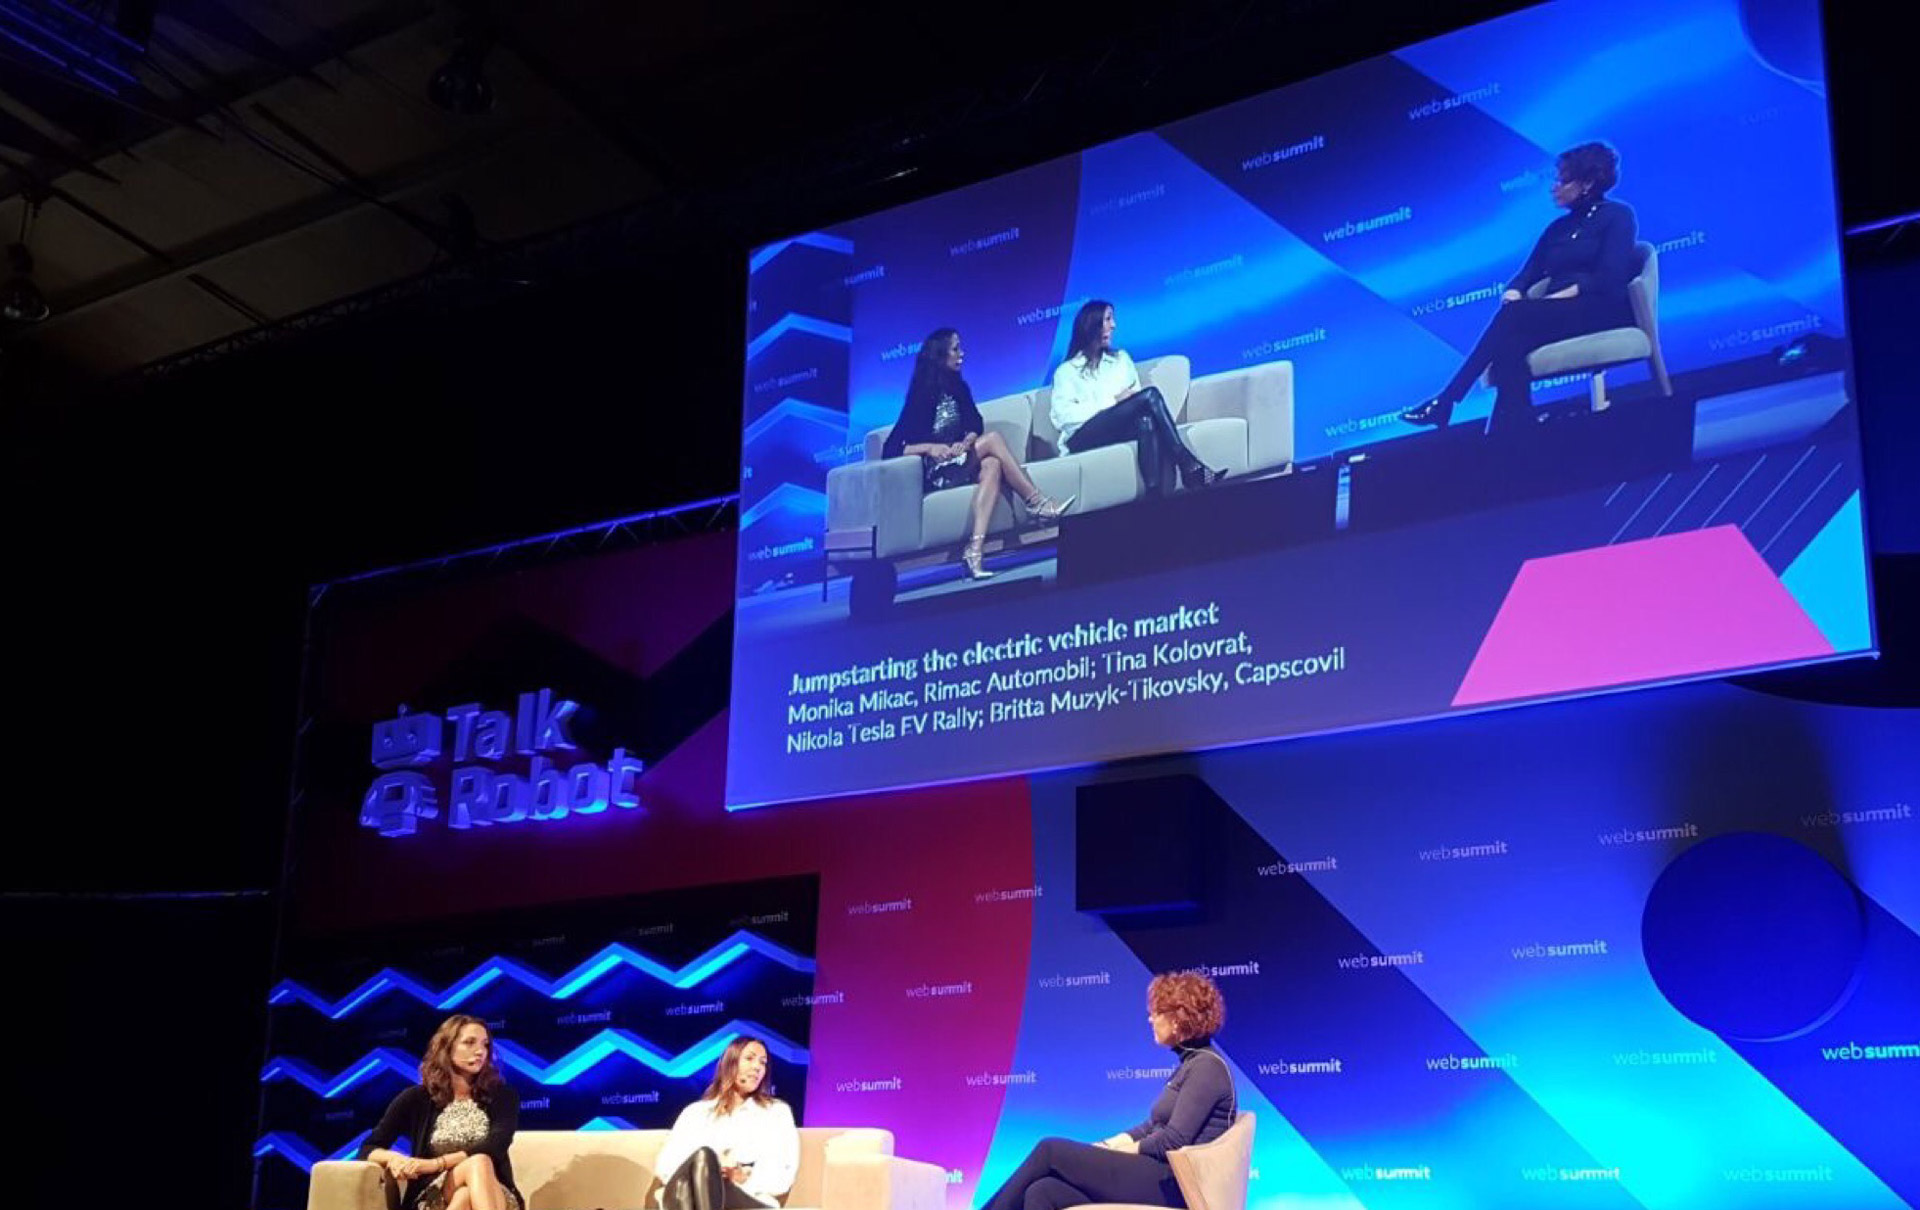 Web Summit 2017: Capscovil founder speaking with COO of Rimac Automobili and Founder of Nikola Tesla EV Rally at auto:tech panel